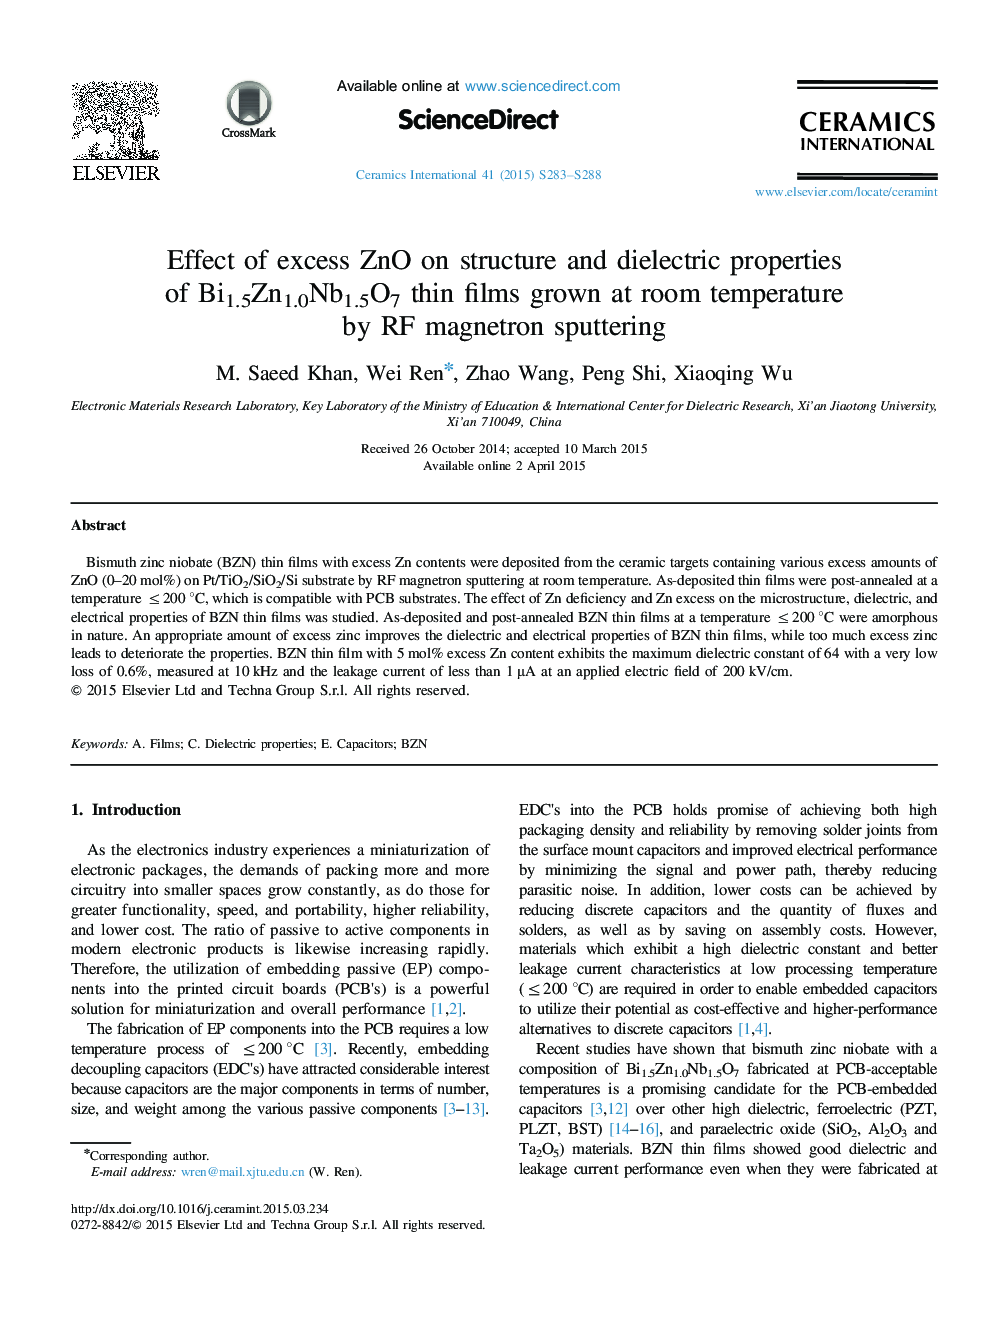 Effect of excess ZnO on structure and dielectric properties of Bi1.5Zn1.0Nb1.5O7 thin films grown at room temperature by RF magnetron sputtering